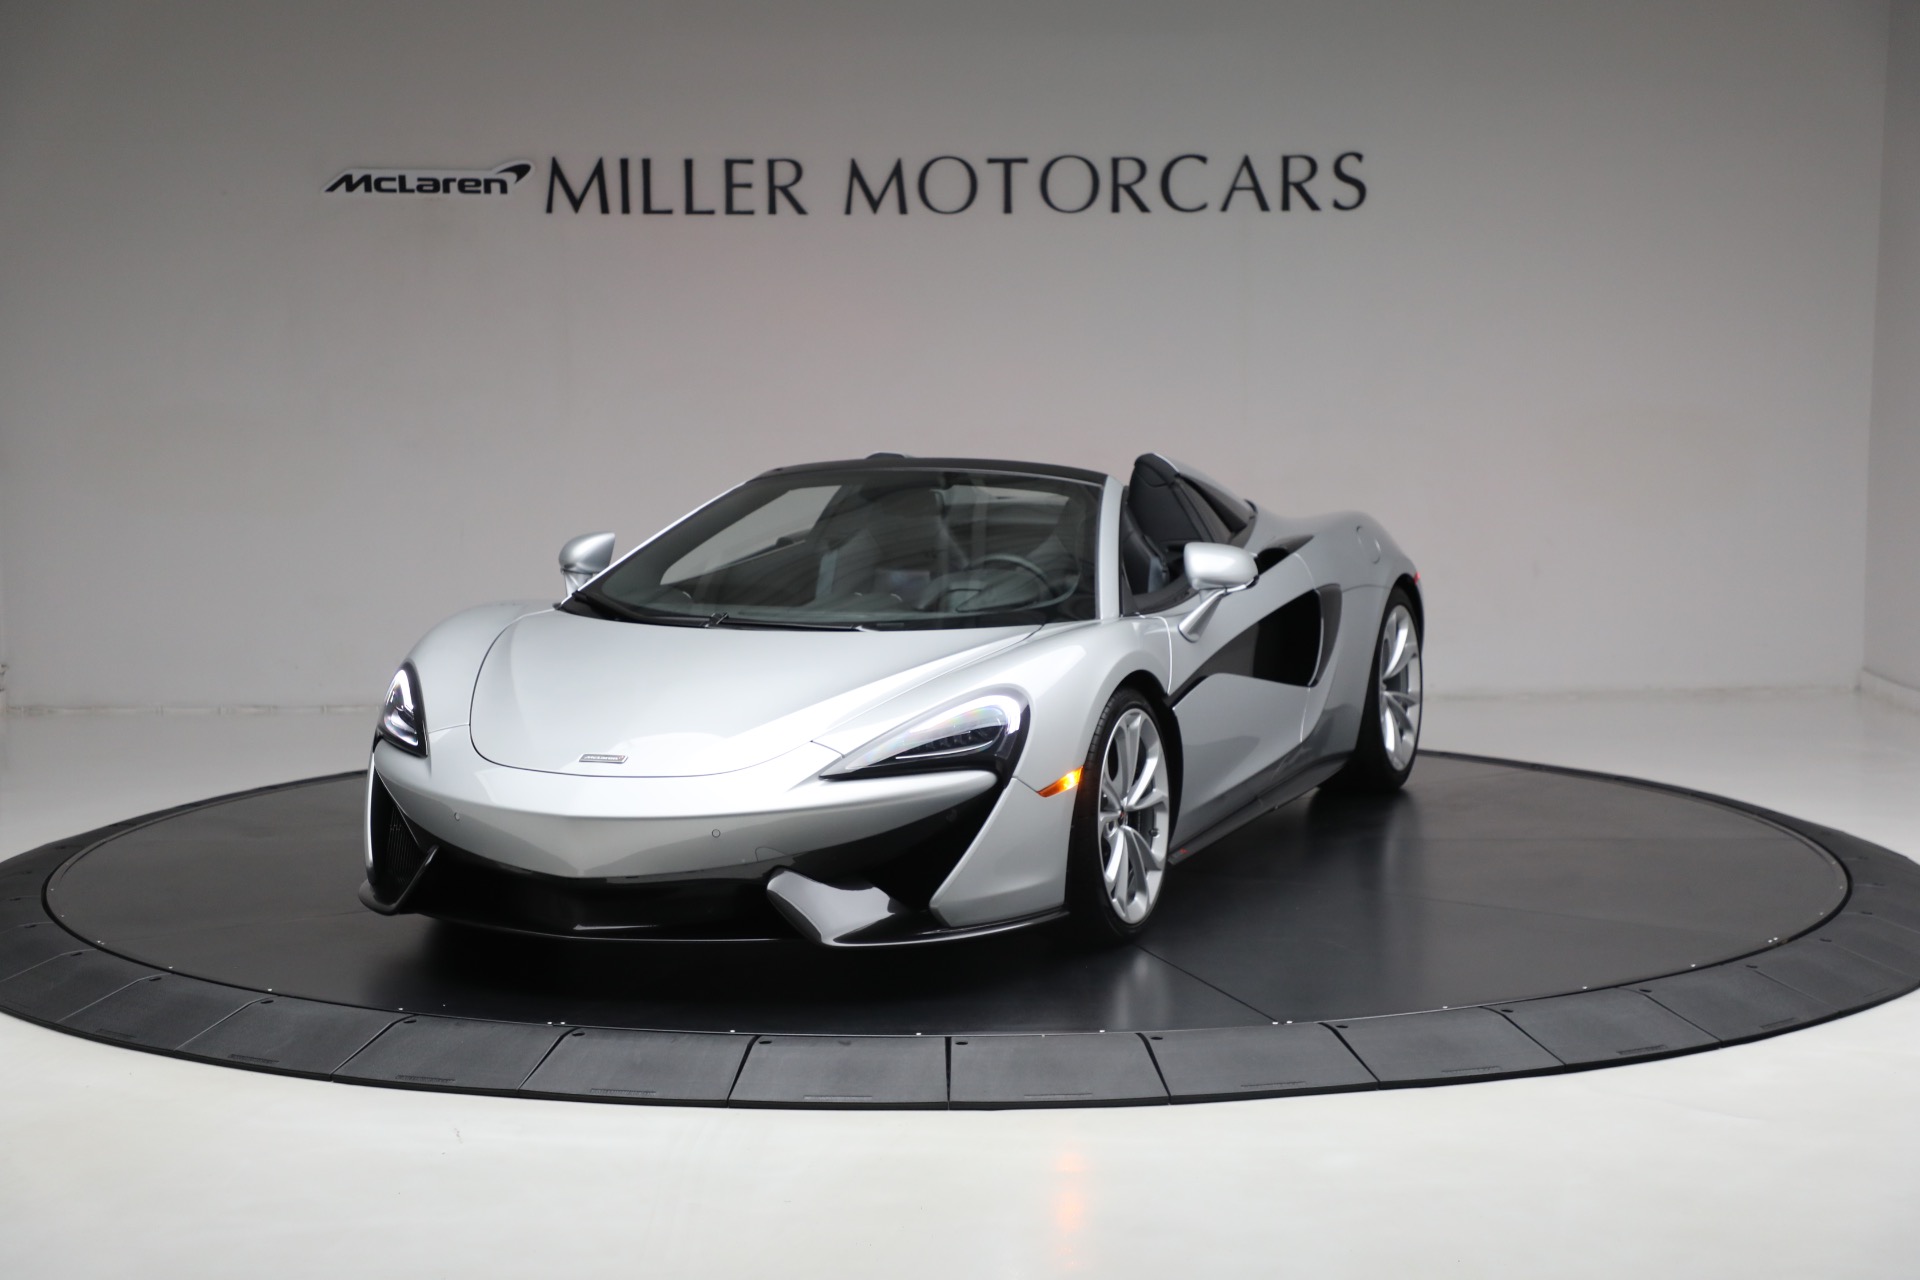 Used 2018 McLaren 570S Spider for sale $173,900 at Bugatti of Greenwich in Greenwich CT 06830 1